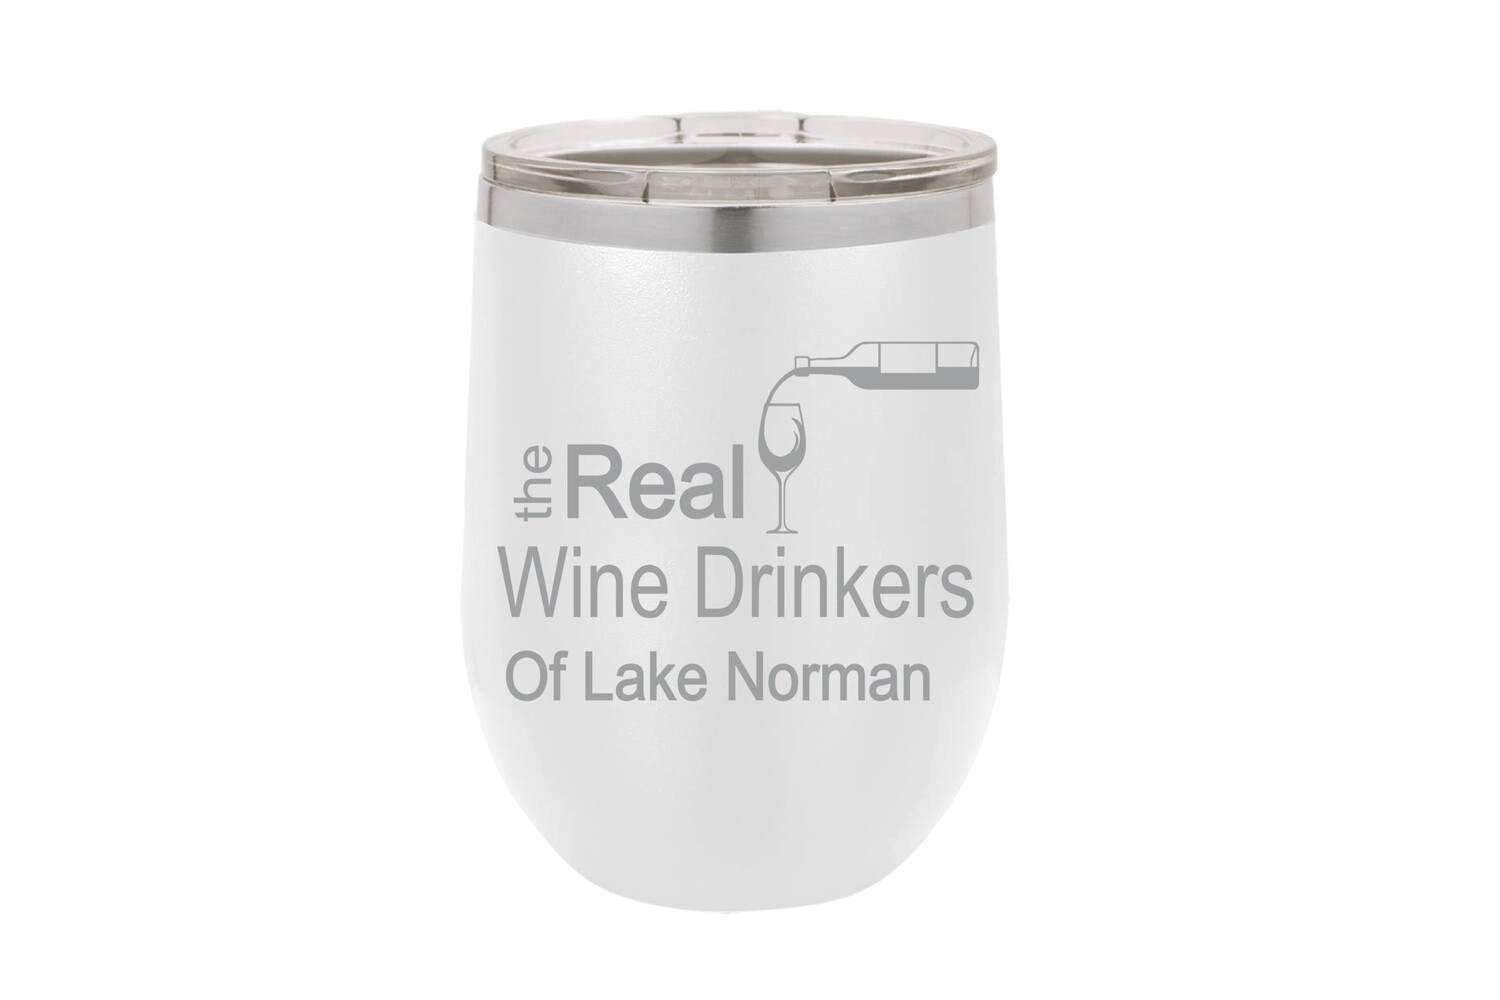 Funny Wine Sayings Personalized Insulated Tumbler / Wine Tumbler